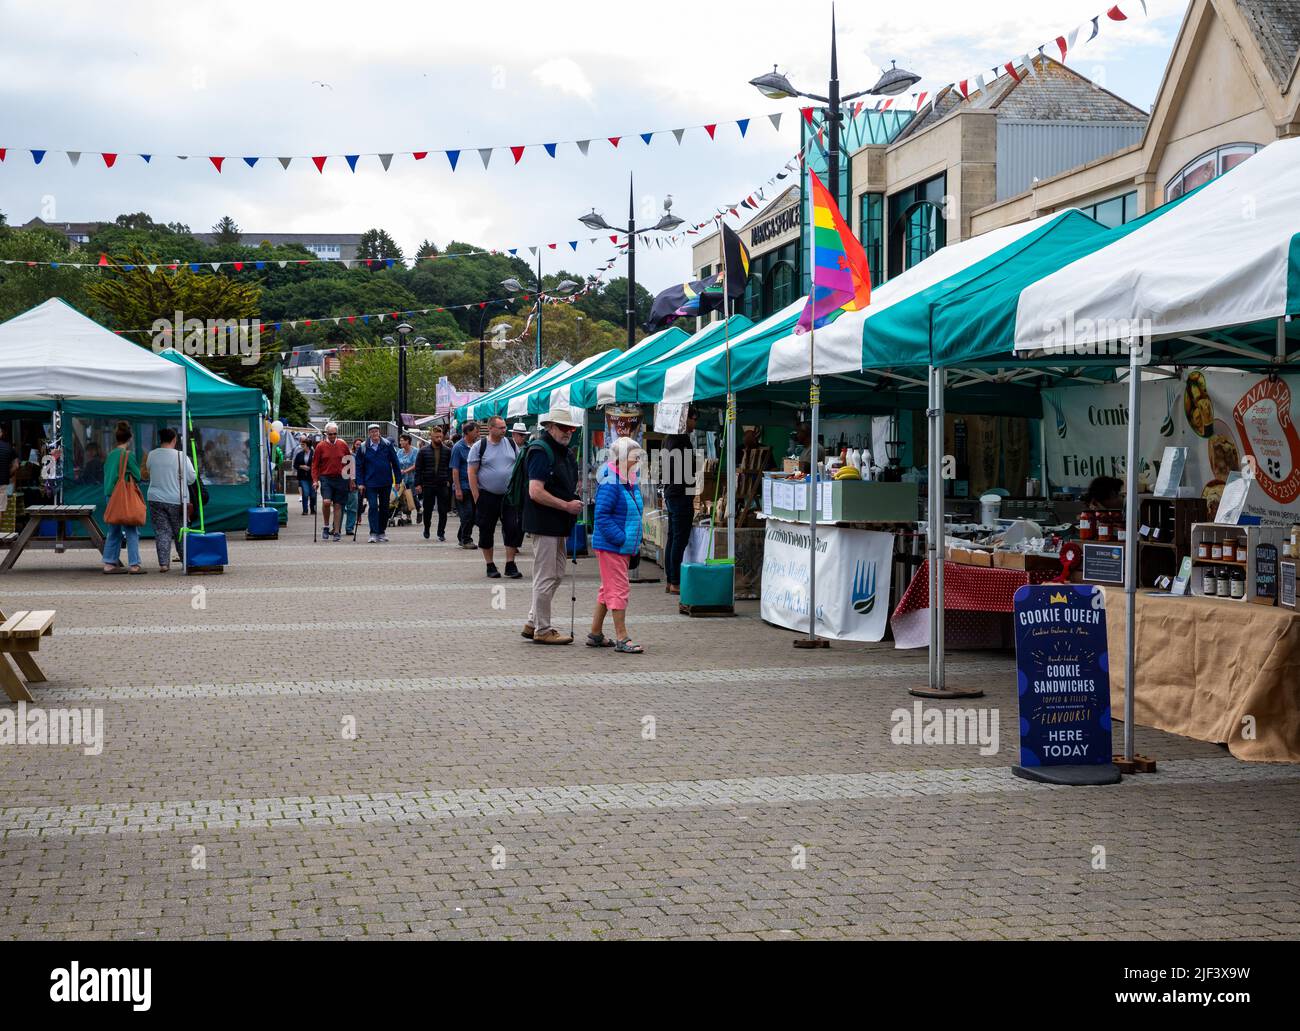 Truro, UK,29th June 2022,People enjoyed the glorious sunshine on Market Day in Truro, Cornwall. The forecast is for sunshine, 16C and a gentle breeze.Credit: Keith Larby/Alamy Live News Stock Photo